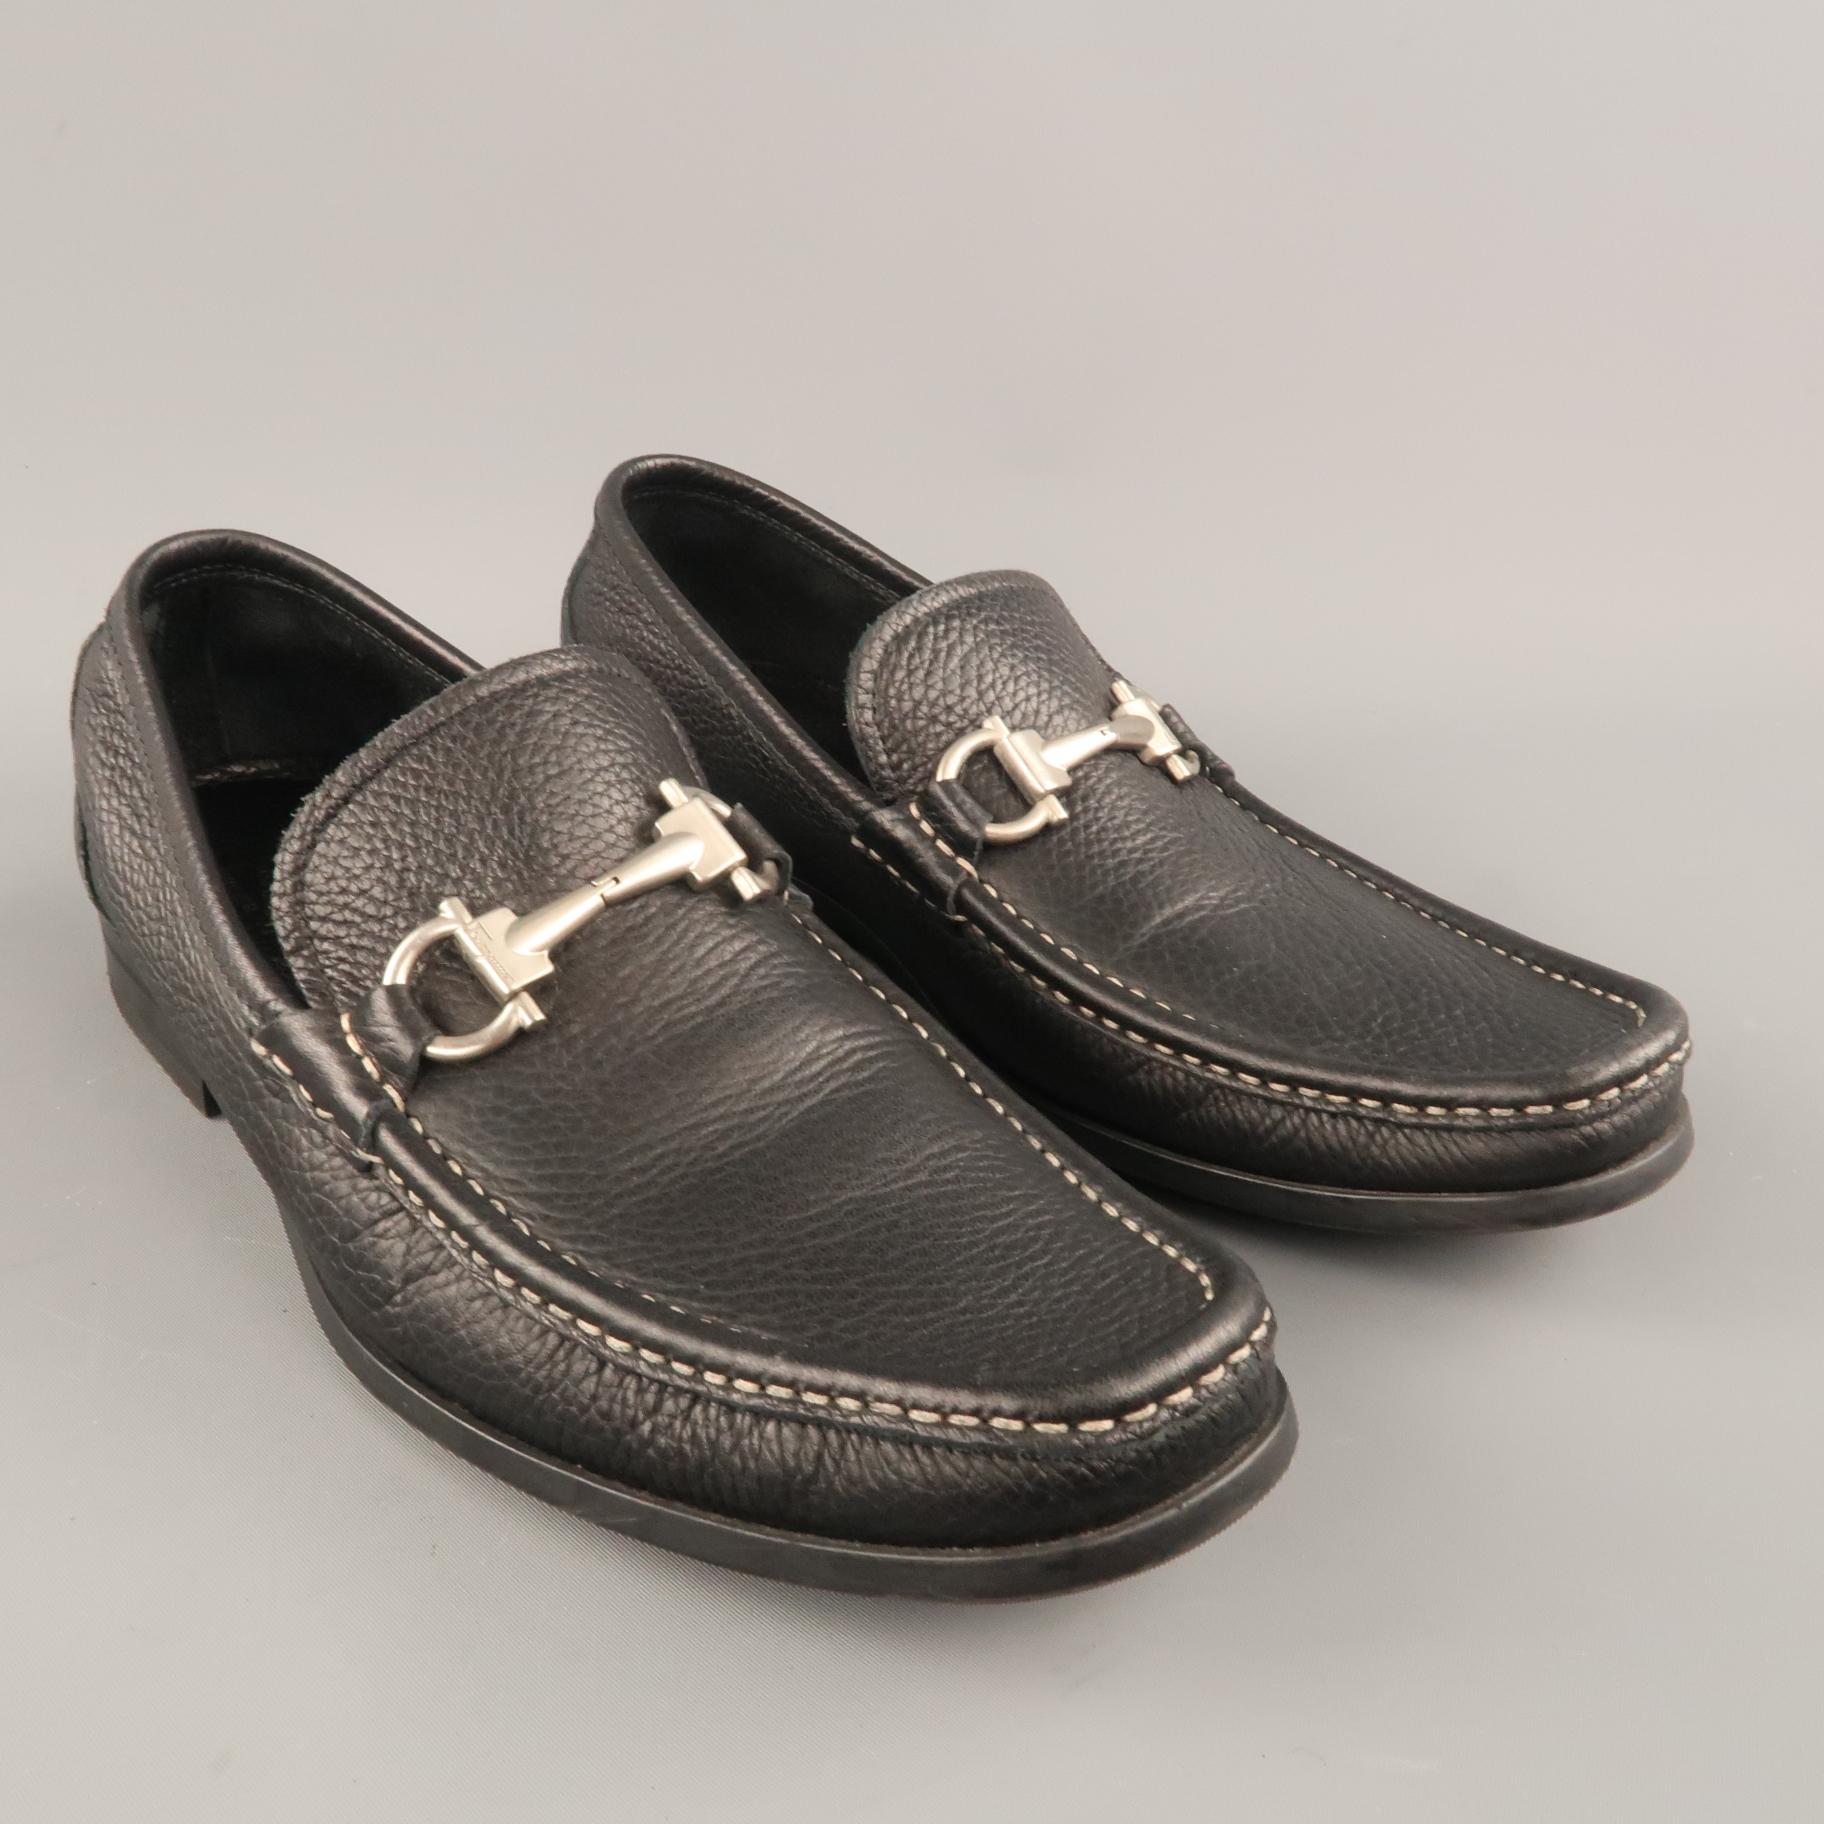 SALVATORE FERRAGAMO loafers come in textured leather with a contrast stitch apron toe detailed with silver tone Gancini hardware. Made in Italy.
 
Excellent Pre-Owned Condition.
Marked: UK 7
 
Outsole: 11.25 x 4 in.